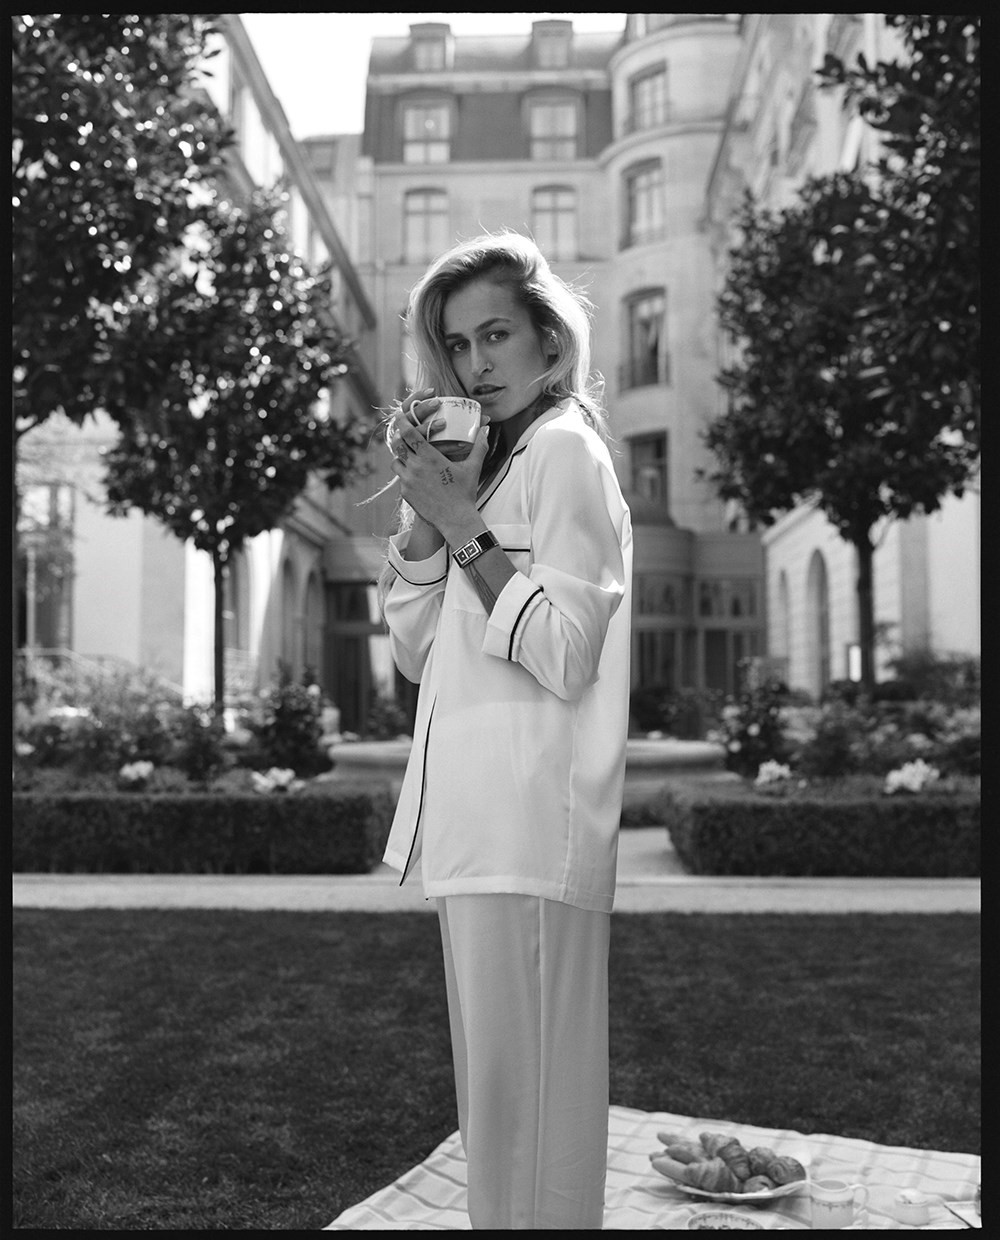 Watch Alice Dellal hang out in the Ritz Paris for new Chanel